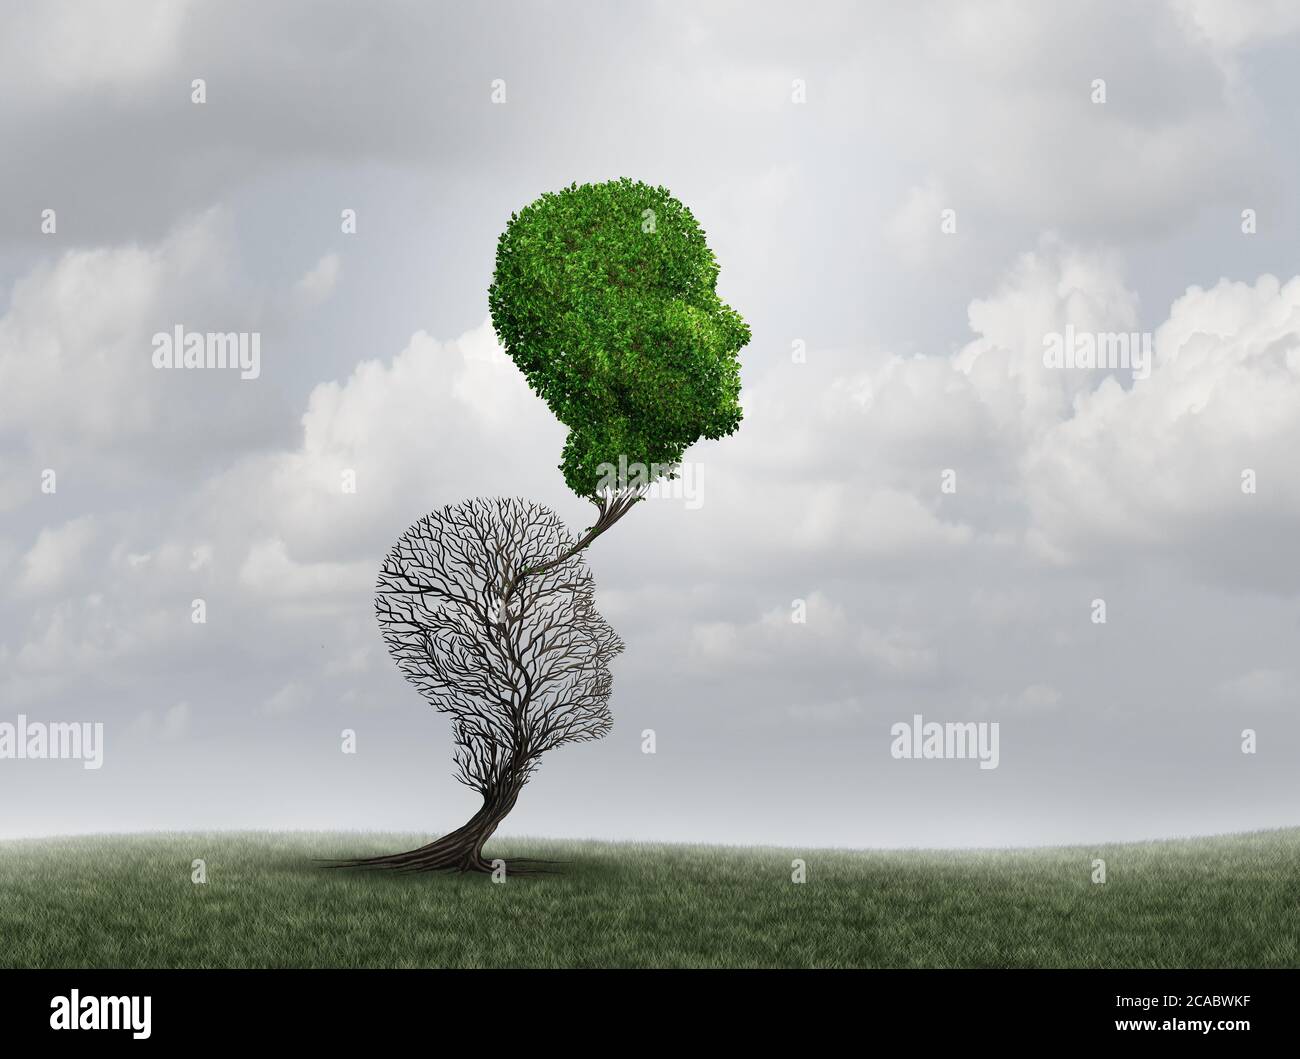 New You and old you as a rebirth and revival or recovery concept with 3D illustration elements. Stock Photo